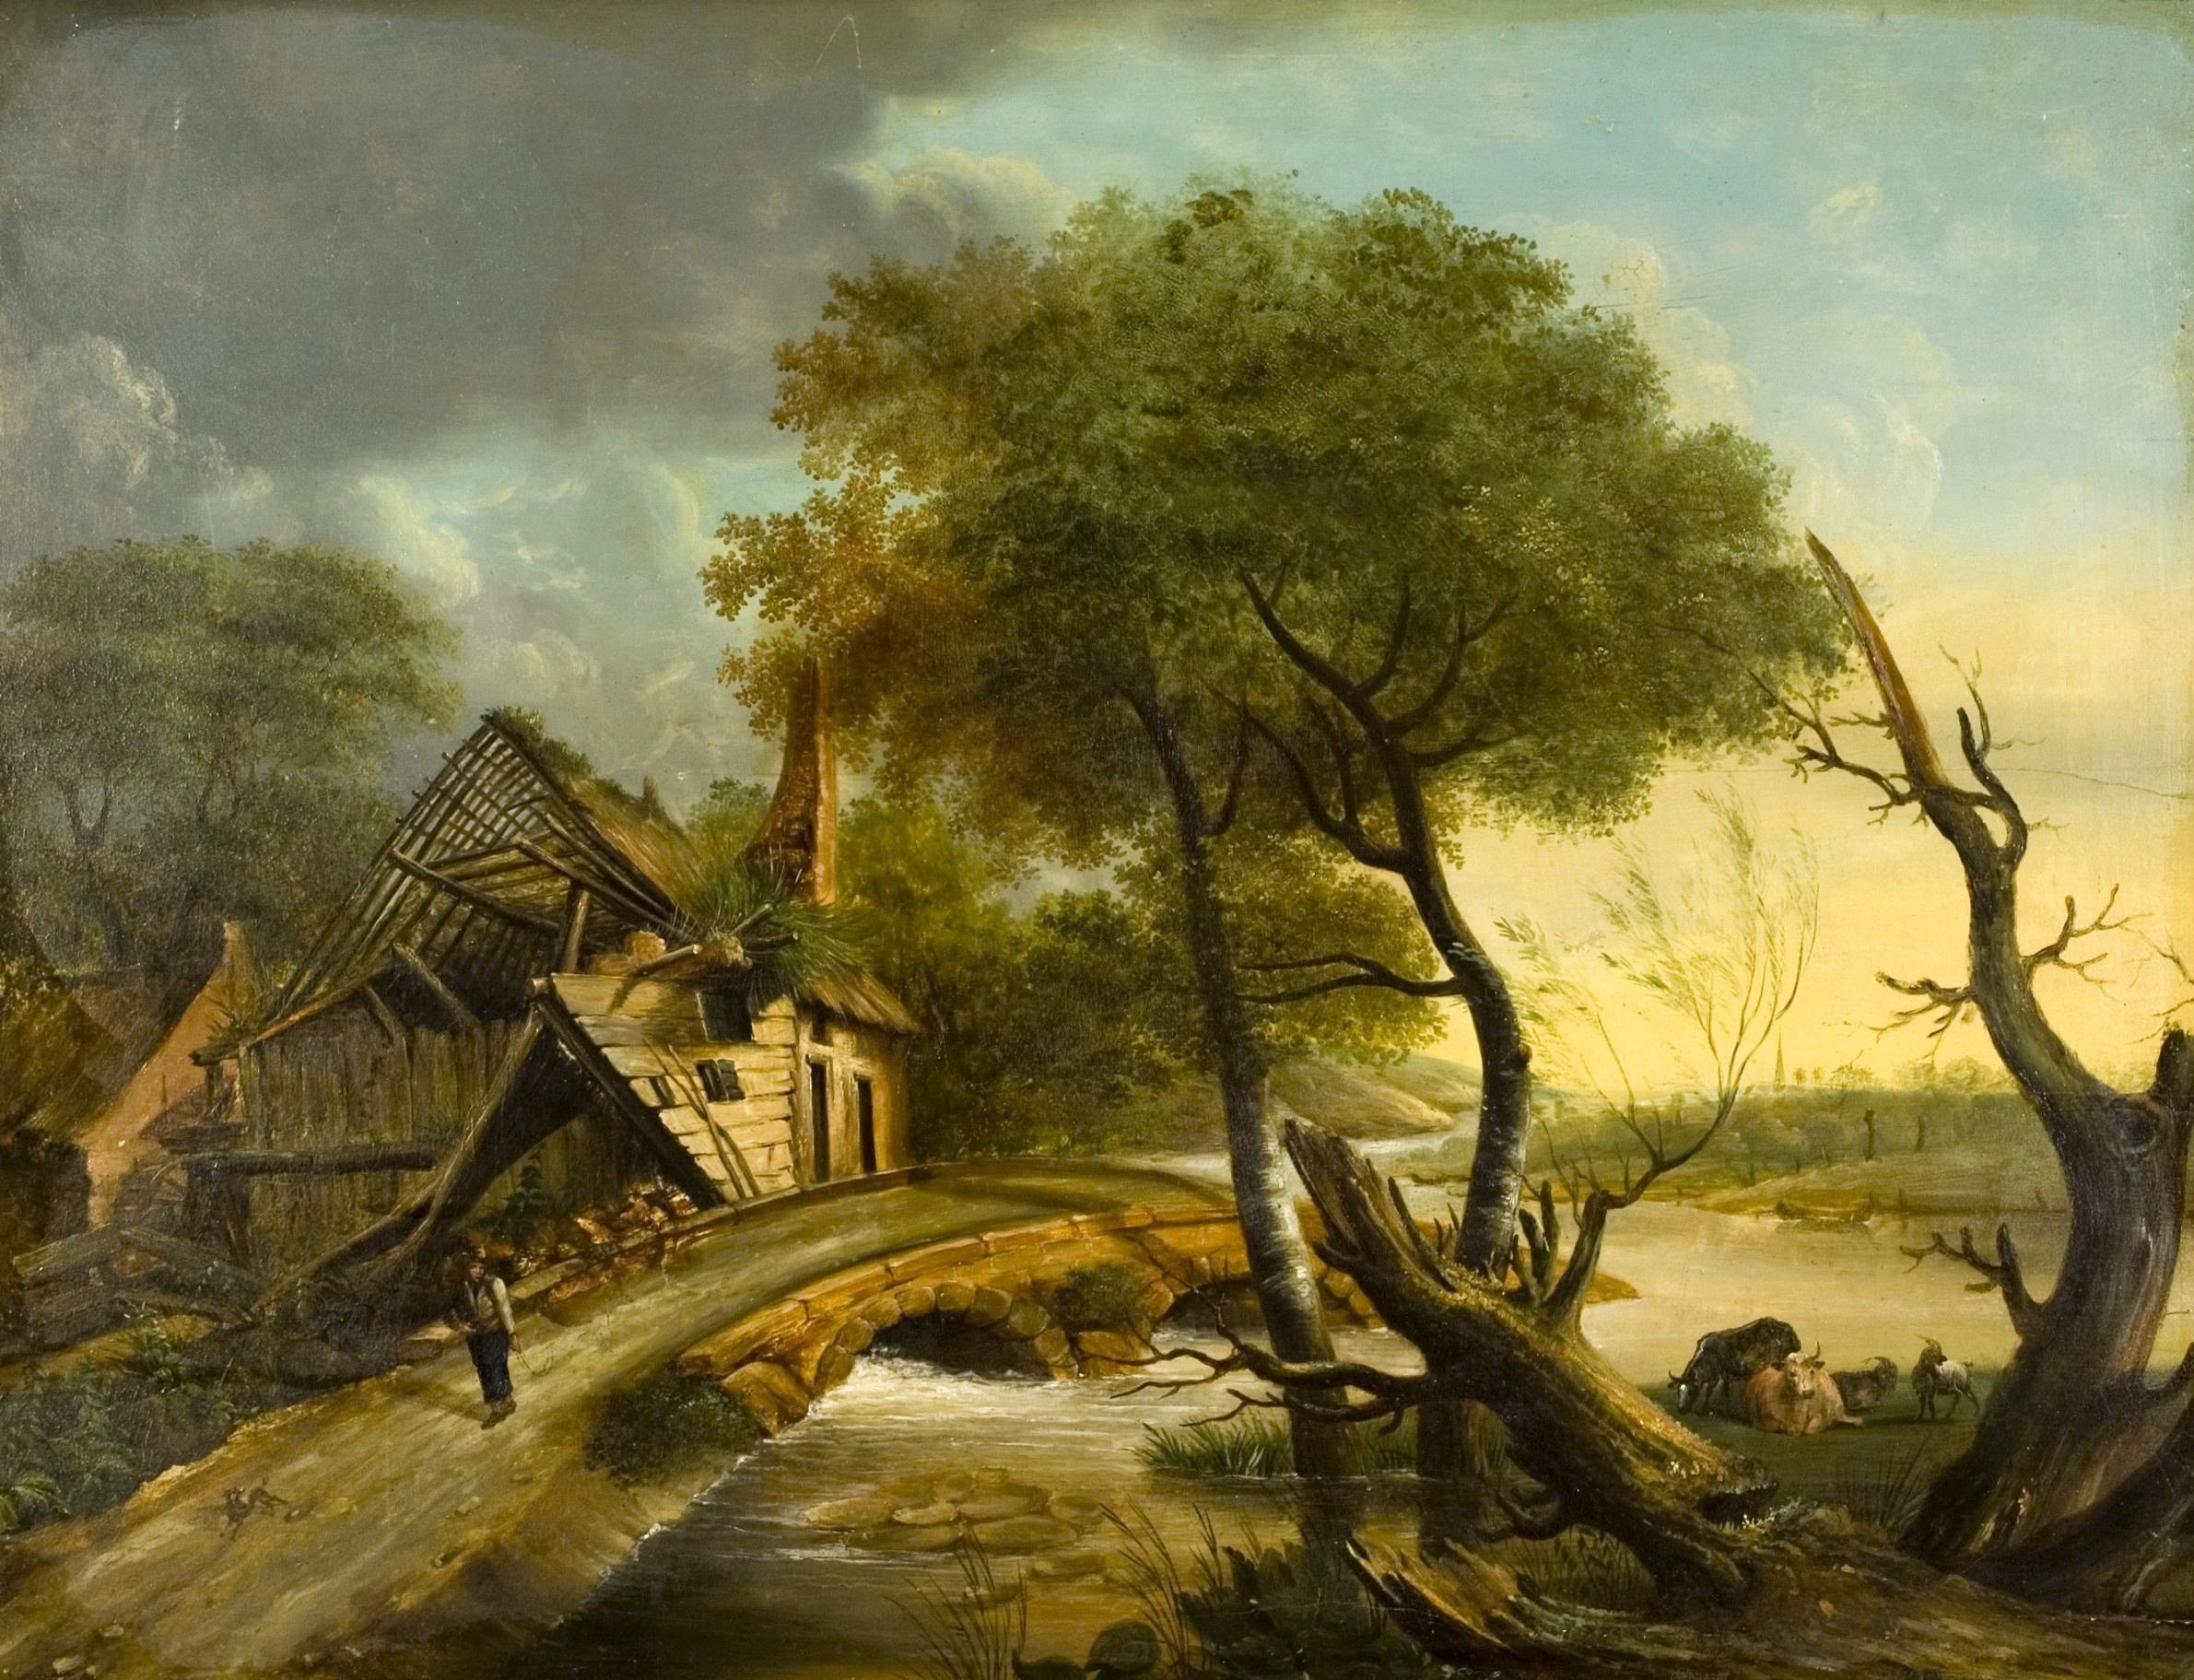 Oil on board.
Rural landscape with a watercourse, a stone bridge and a house in ruins, located among trees, animated by the presence of a person and without apparent subject matter that is inspired by Baroque works from Northern Europe. Given the